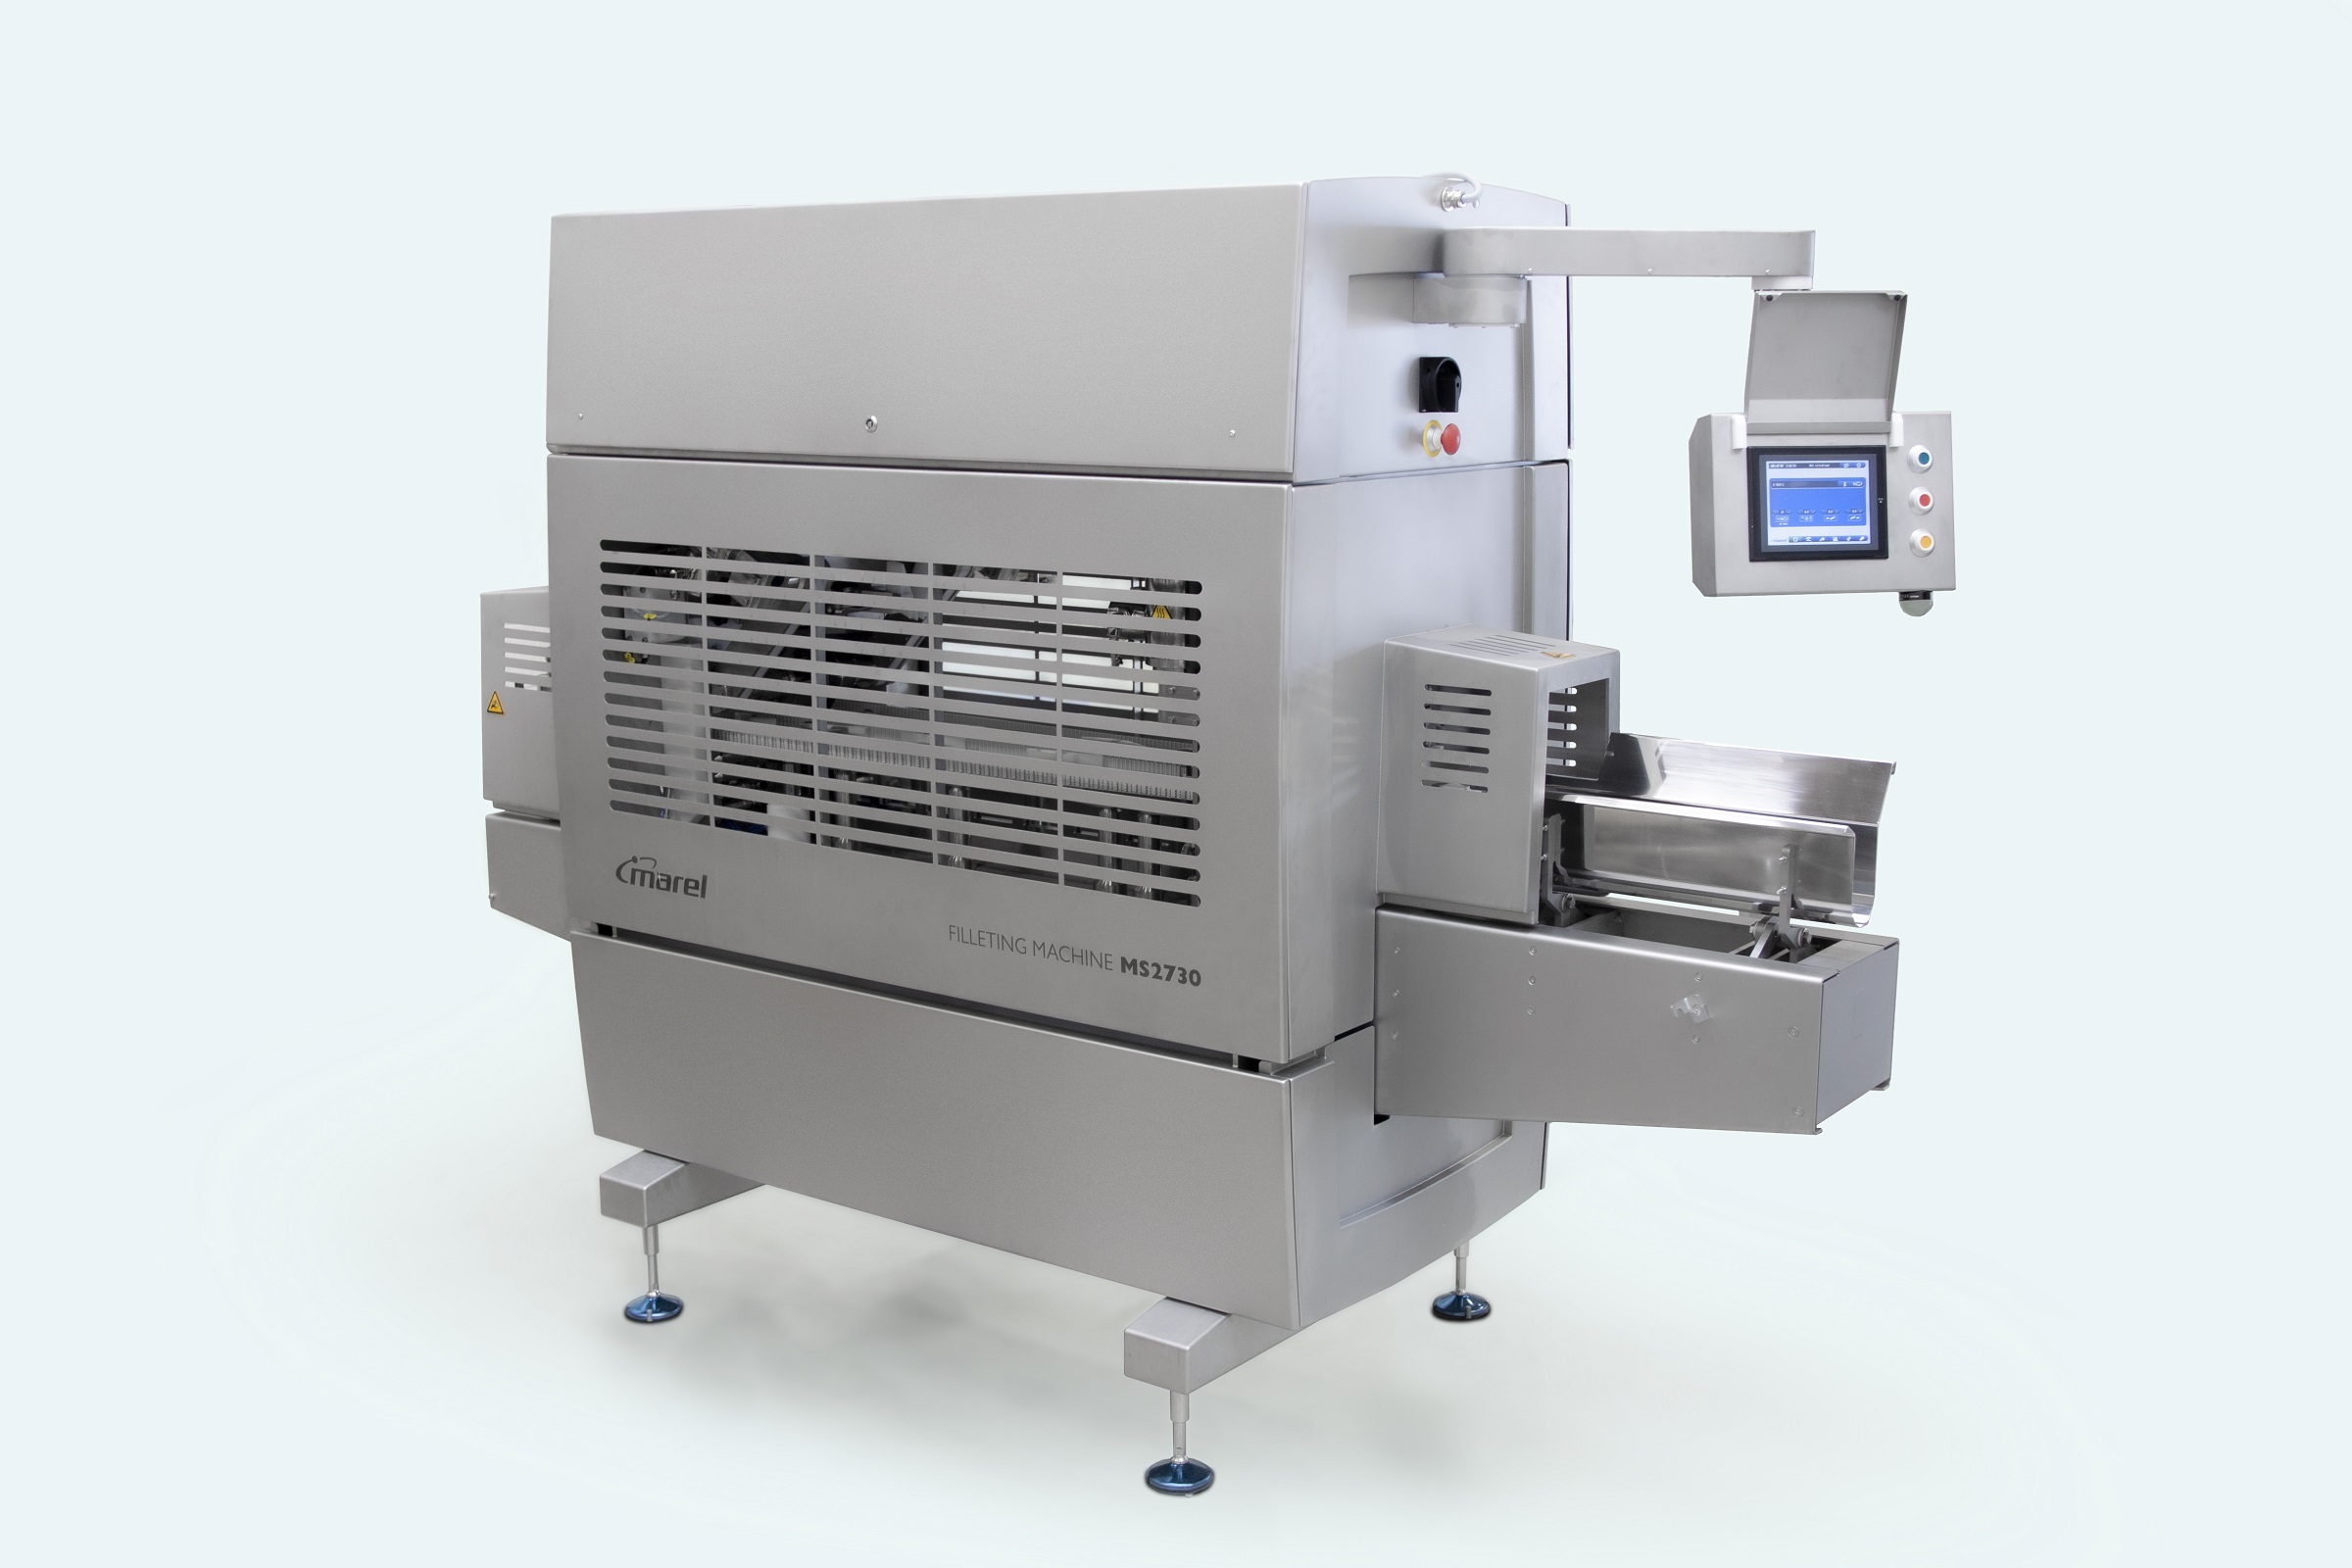 Automation is king with the new Kingfish Filleting Machine